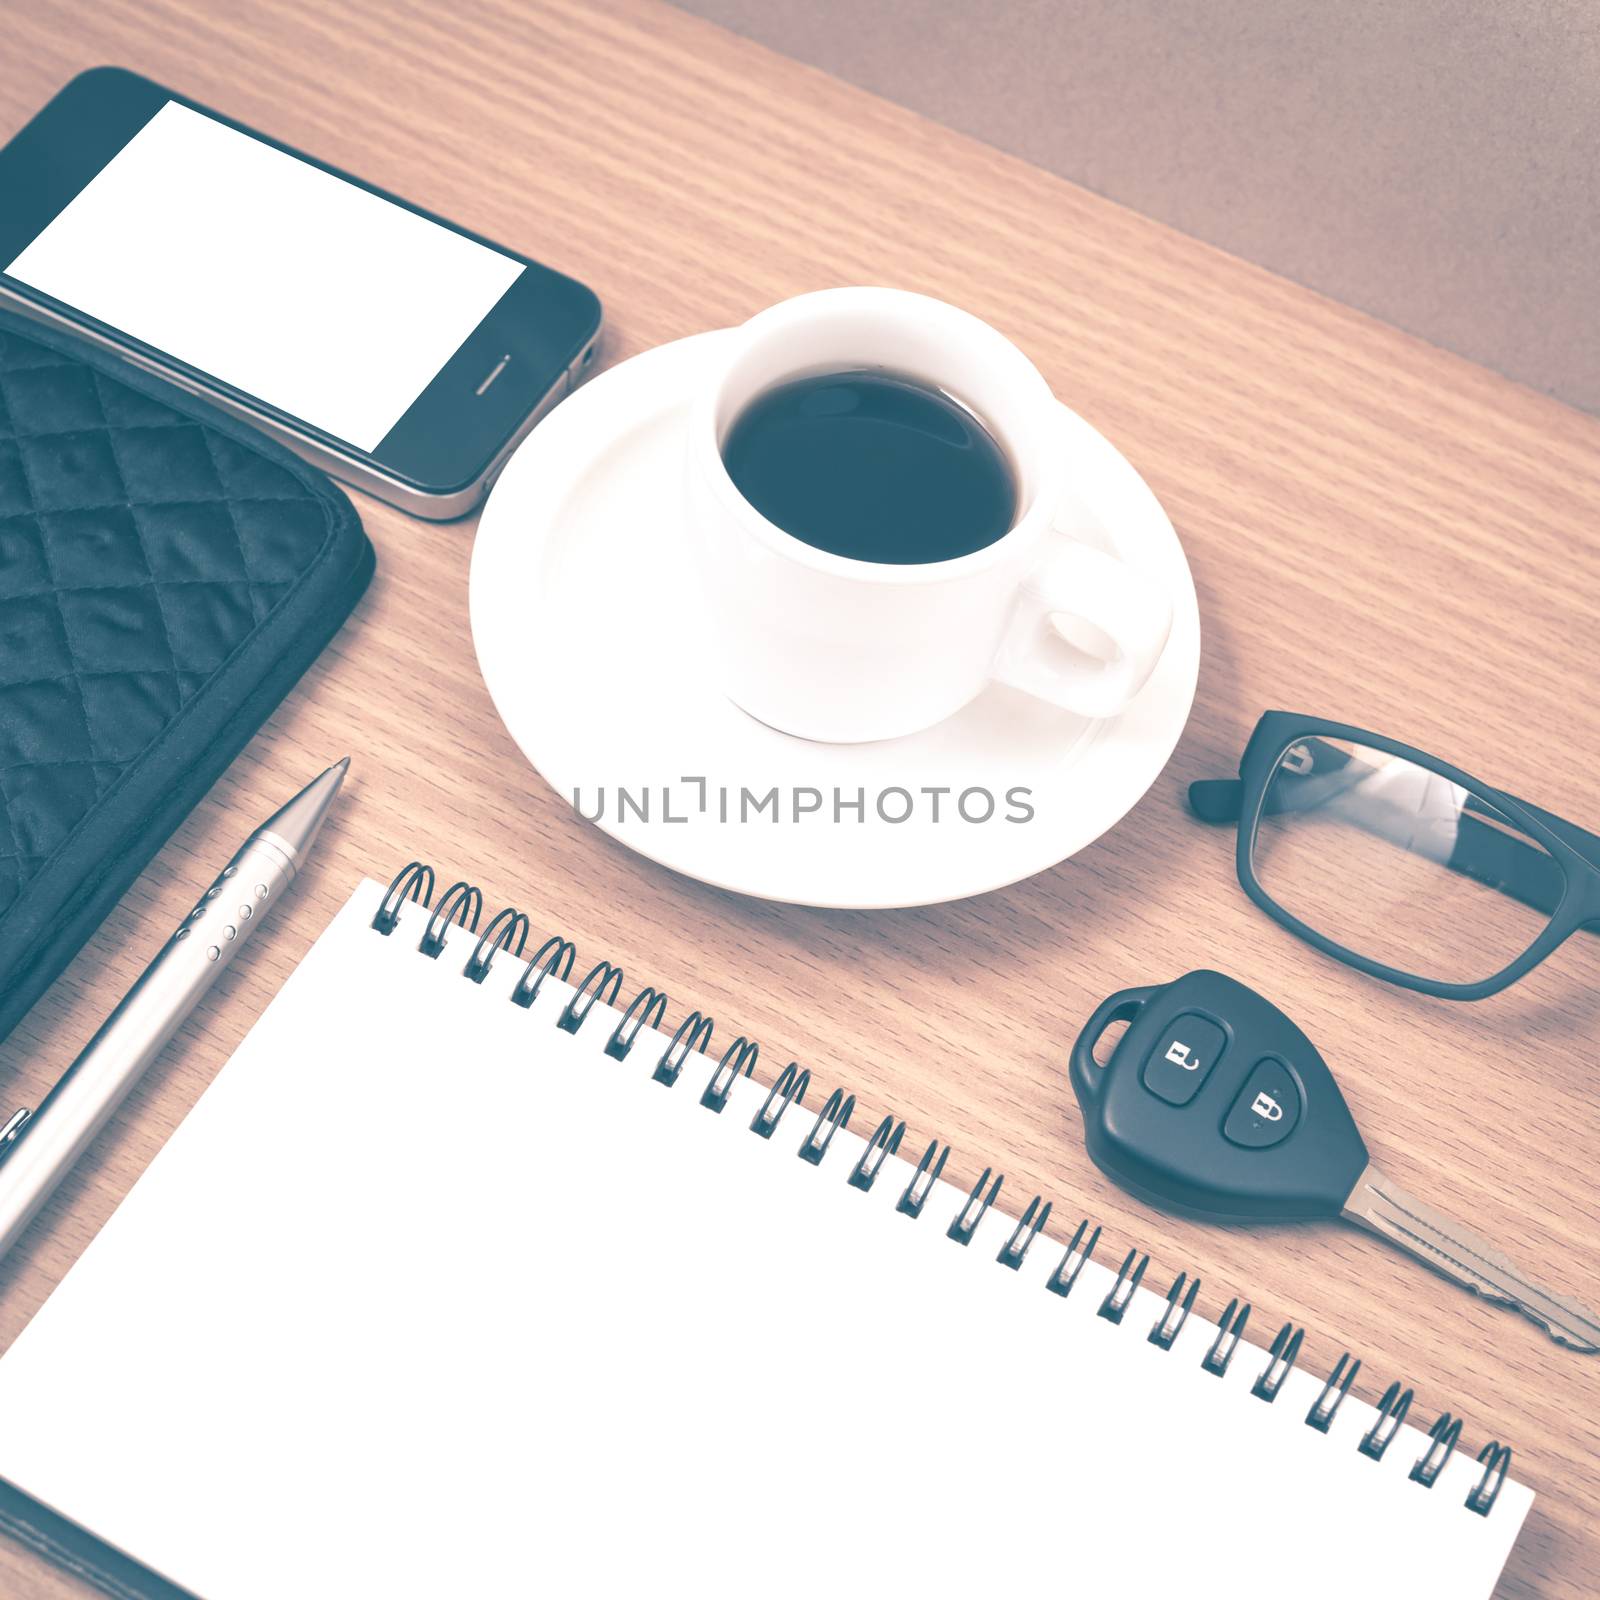 coffee and phone with notepad,car key,eyeglasses and wallet on wood table background vintage style